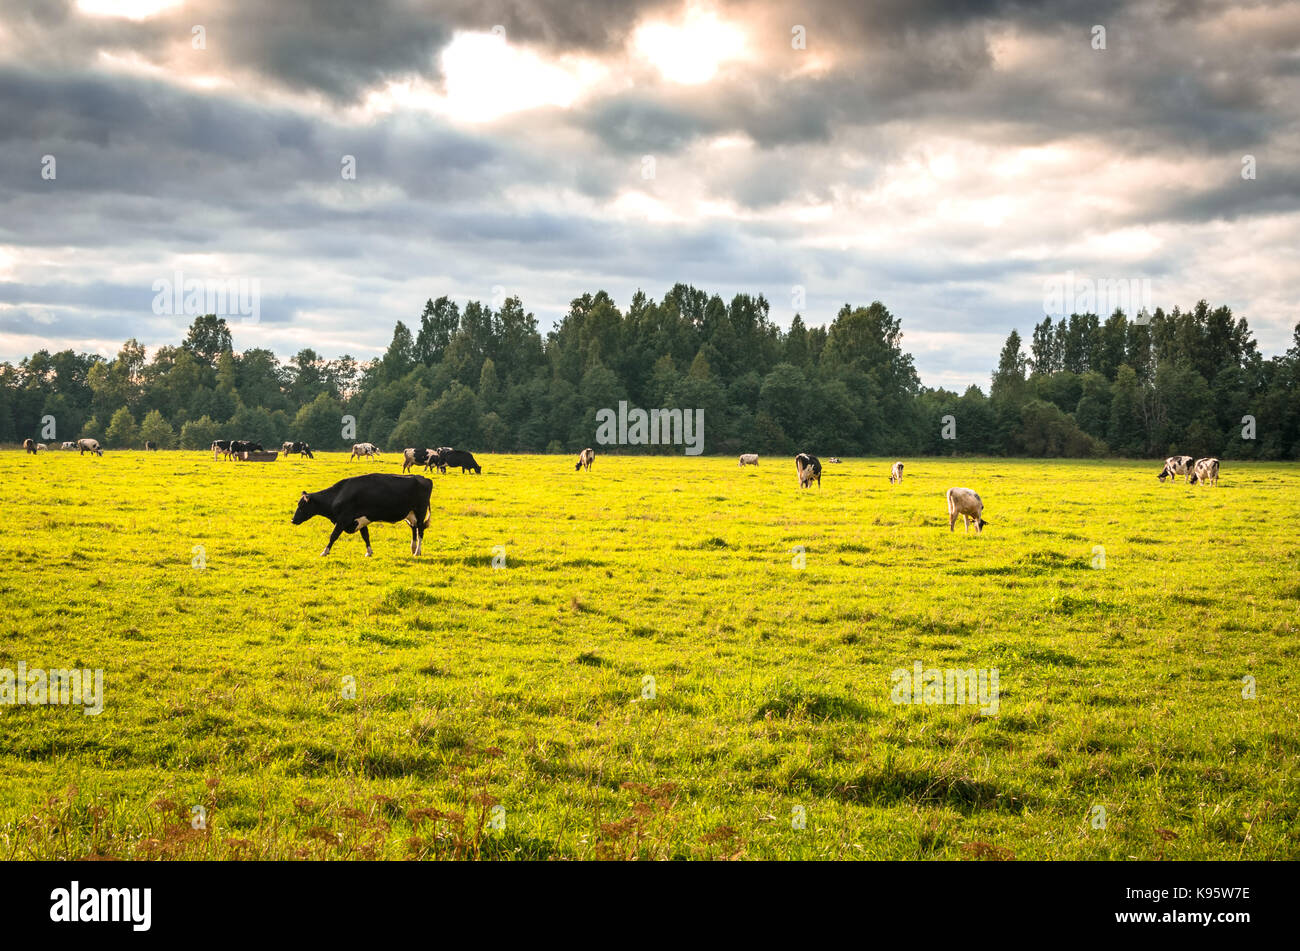 Cows feeding in the countryside under a cloudy sky Stock Photo